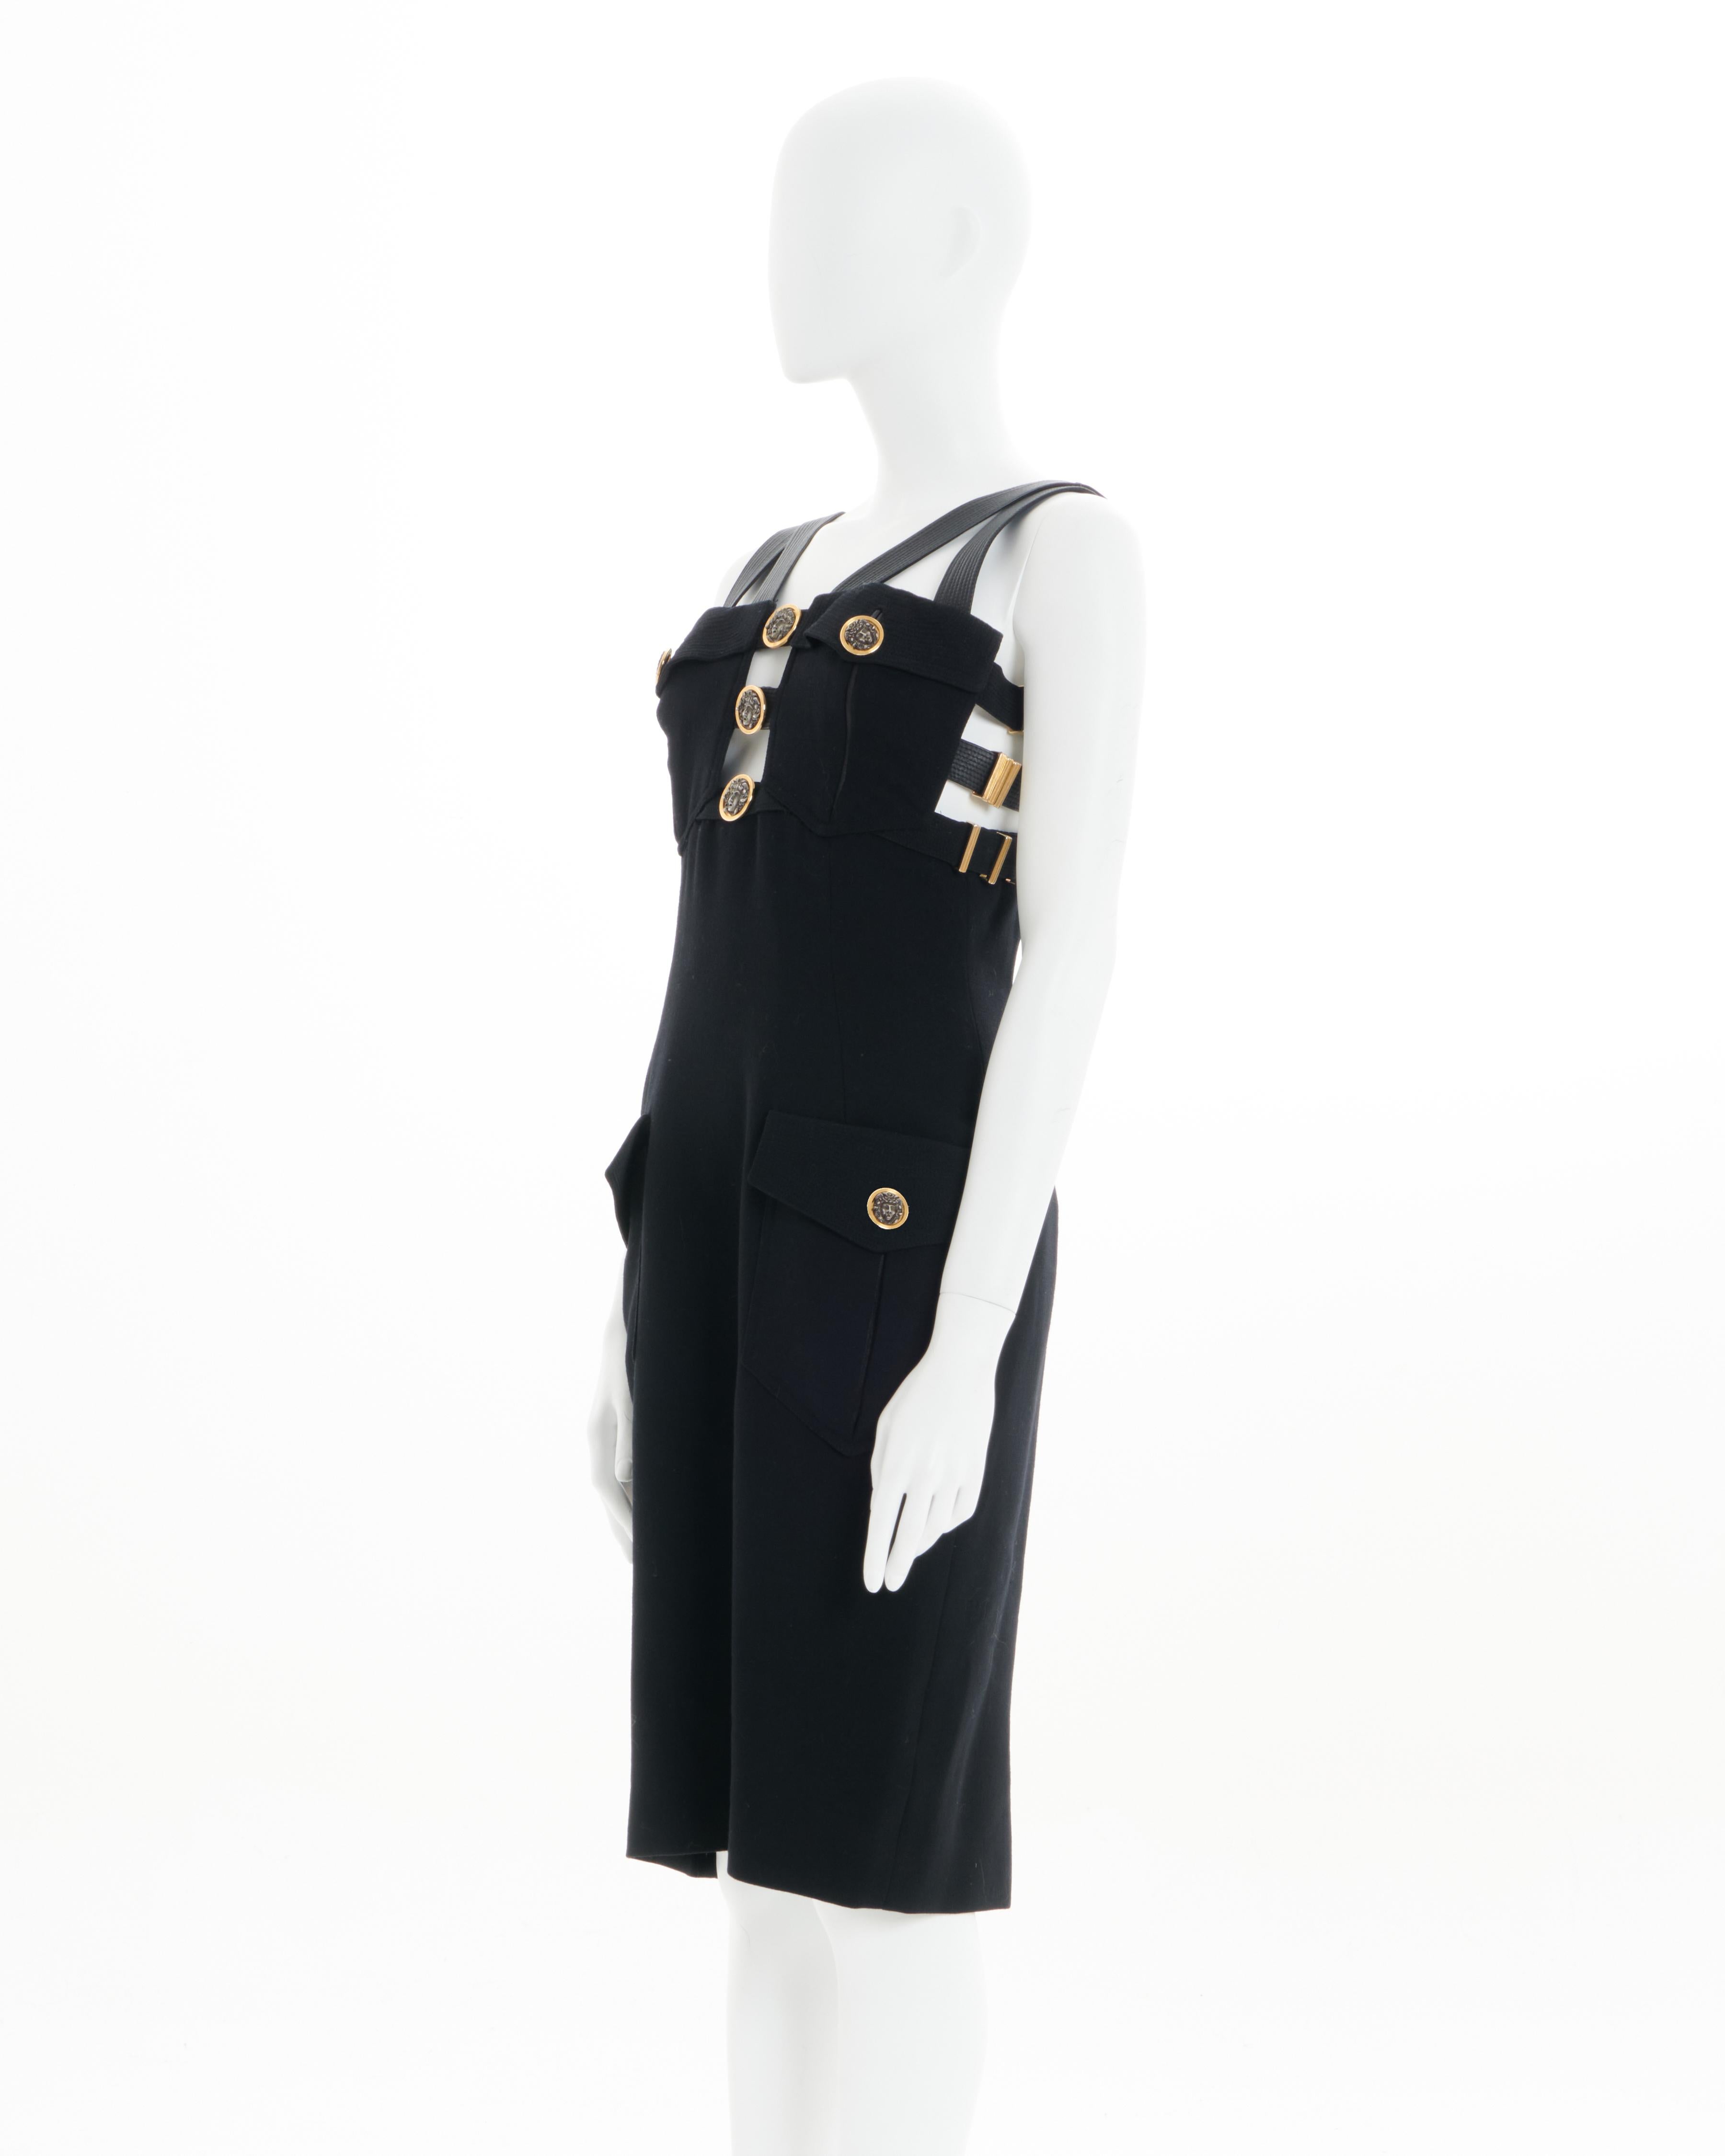 - ‘Miss S&M’ collection 
- Sold by Skof.Archive
- Designed by Gianni Versace
- Bondage style bustier with topstitched leather shoulder straps 
- Decorative medusa buttons 
- Gilded buckle straps at the sides and back 
- Four front flap pockets 
-